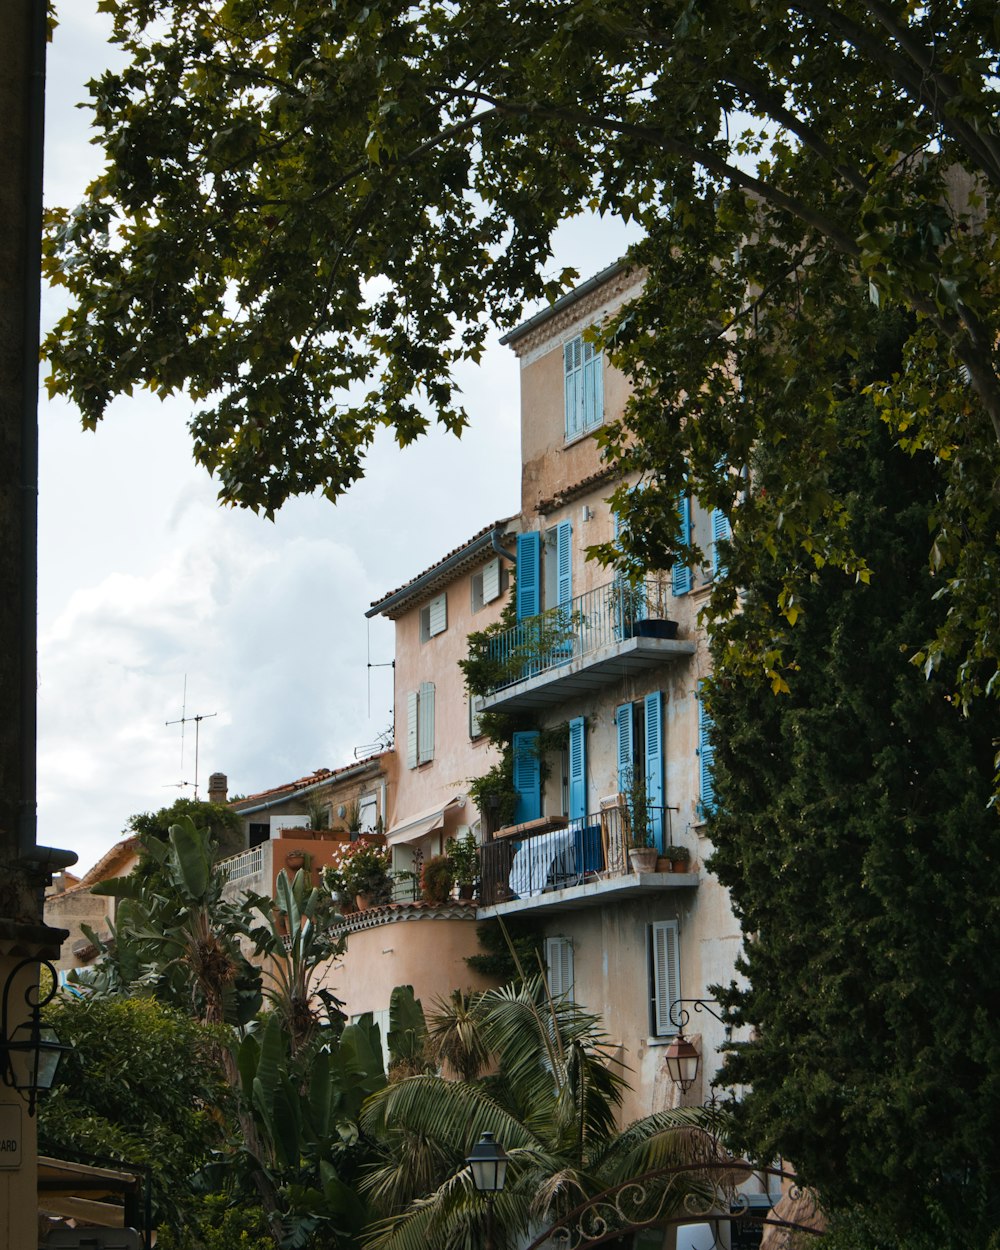 a tall building with blue shutters next to trees